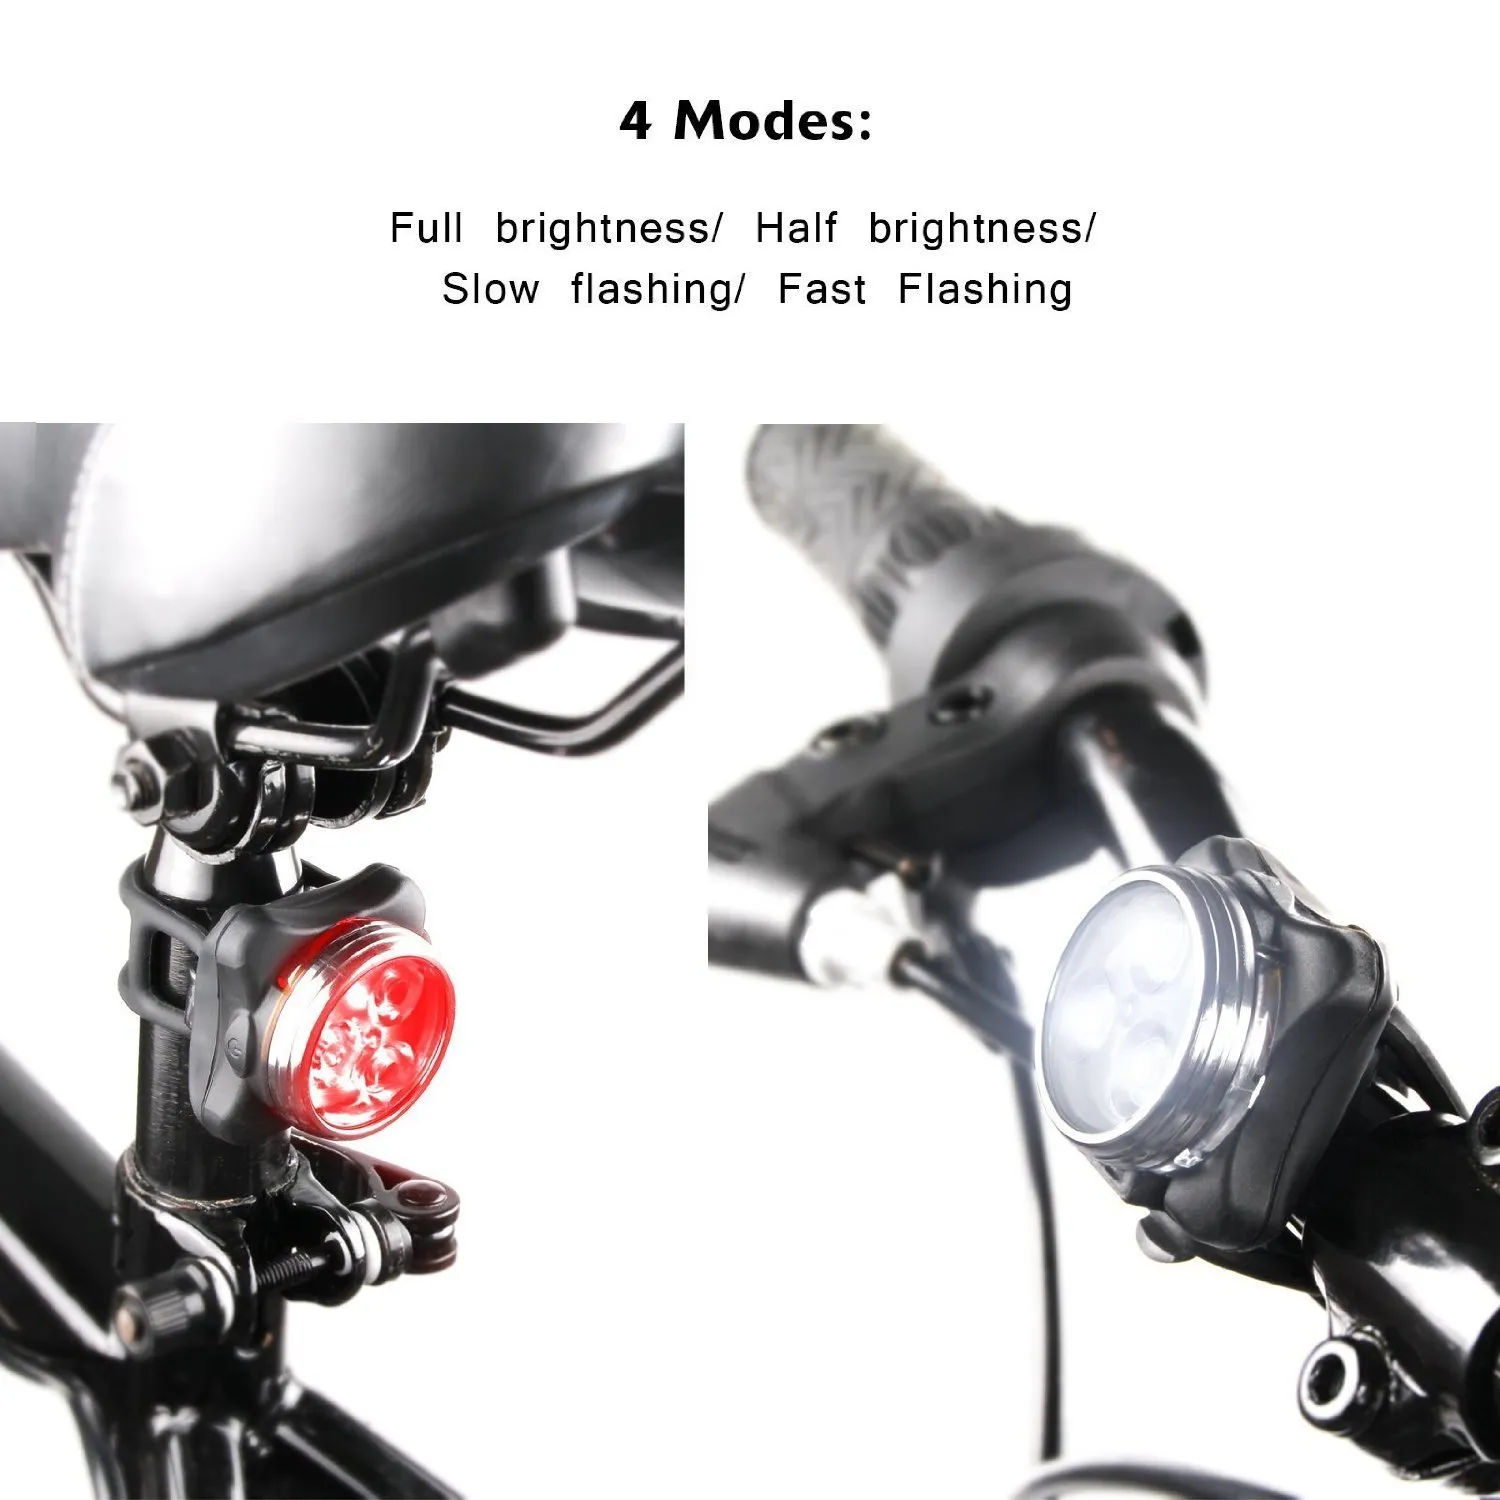 Lighting Rechargeable Headlight Taillight Combinations,Includes Front and Rear Bicycle Light Set, Bike Lights,2 USB Cables,4 Modes, 350lm,Water